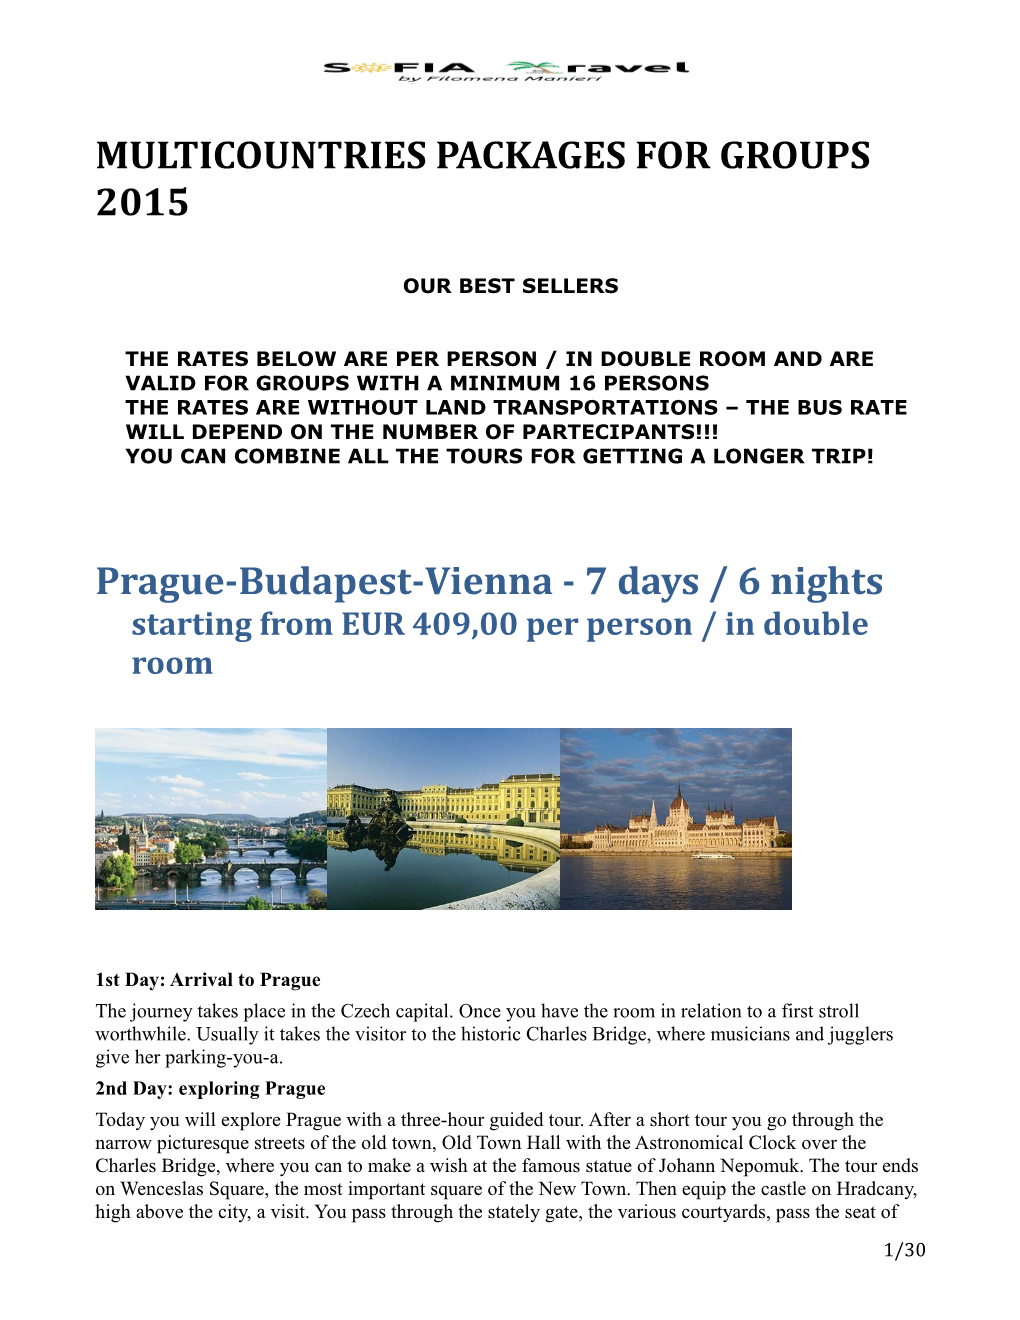 Multicountries Packages for Groups 2015